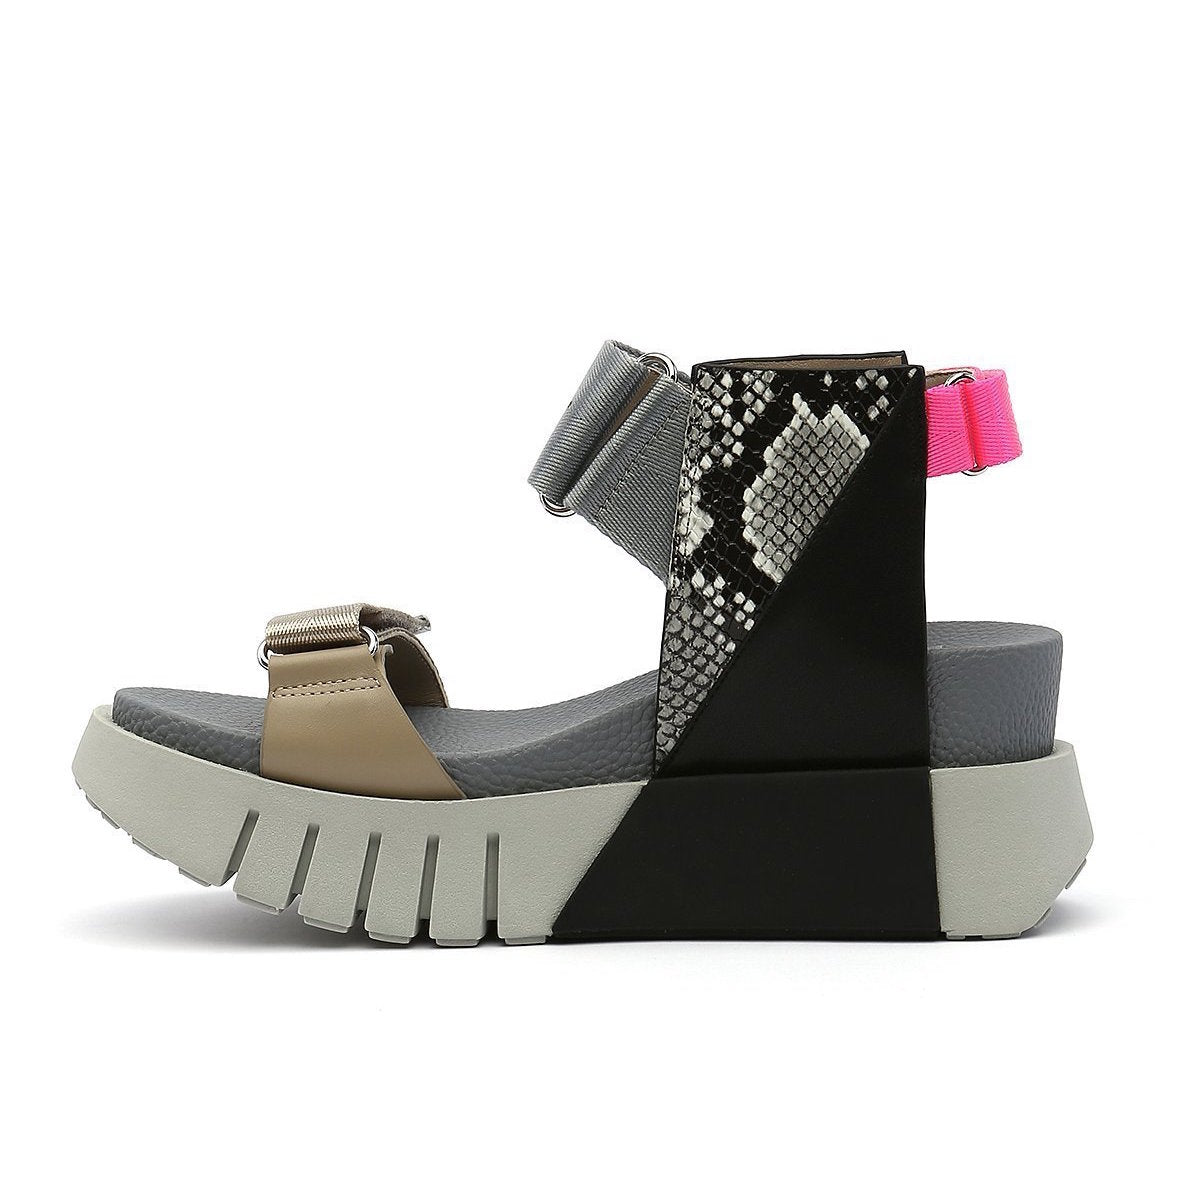 Inner view of the united nude delta run sandal. This sandal is grey with gold, black, snake print, and a touch of hot pink. The sandal has a white platform sole and adjustable back, ankle, and toe bed straps.